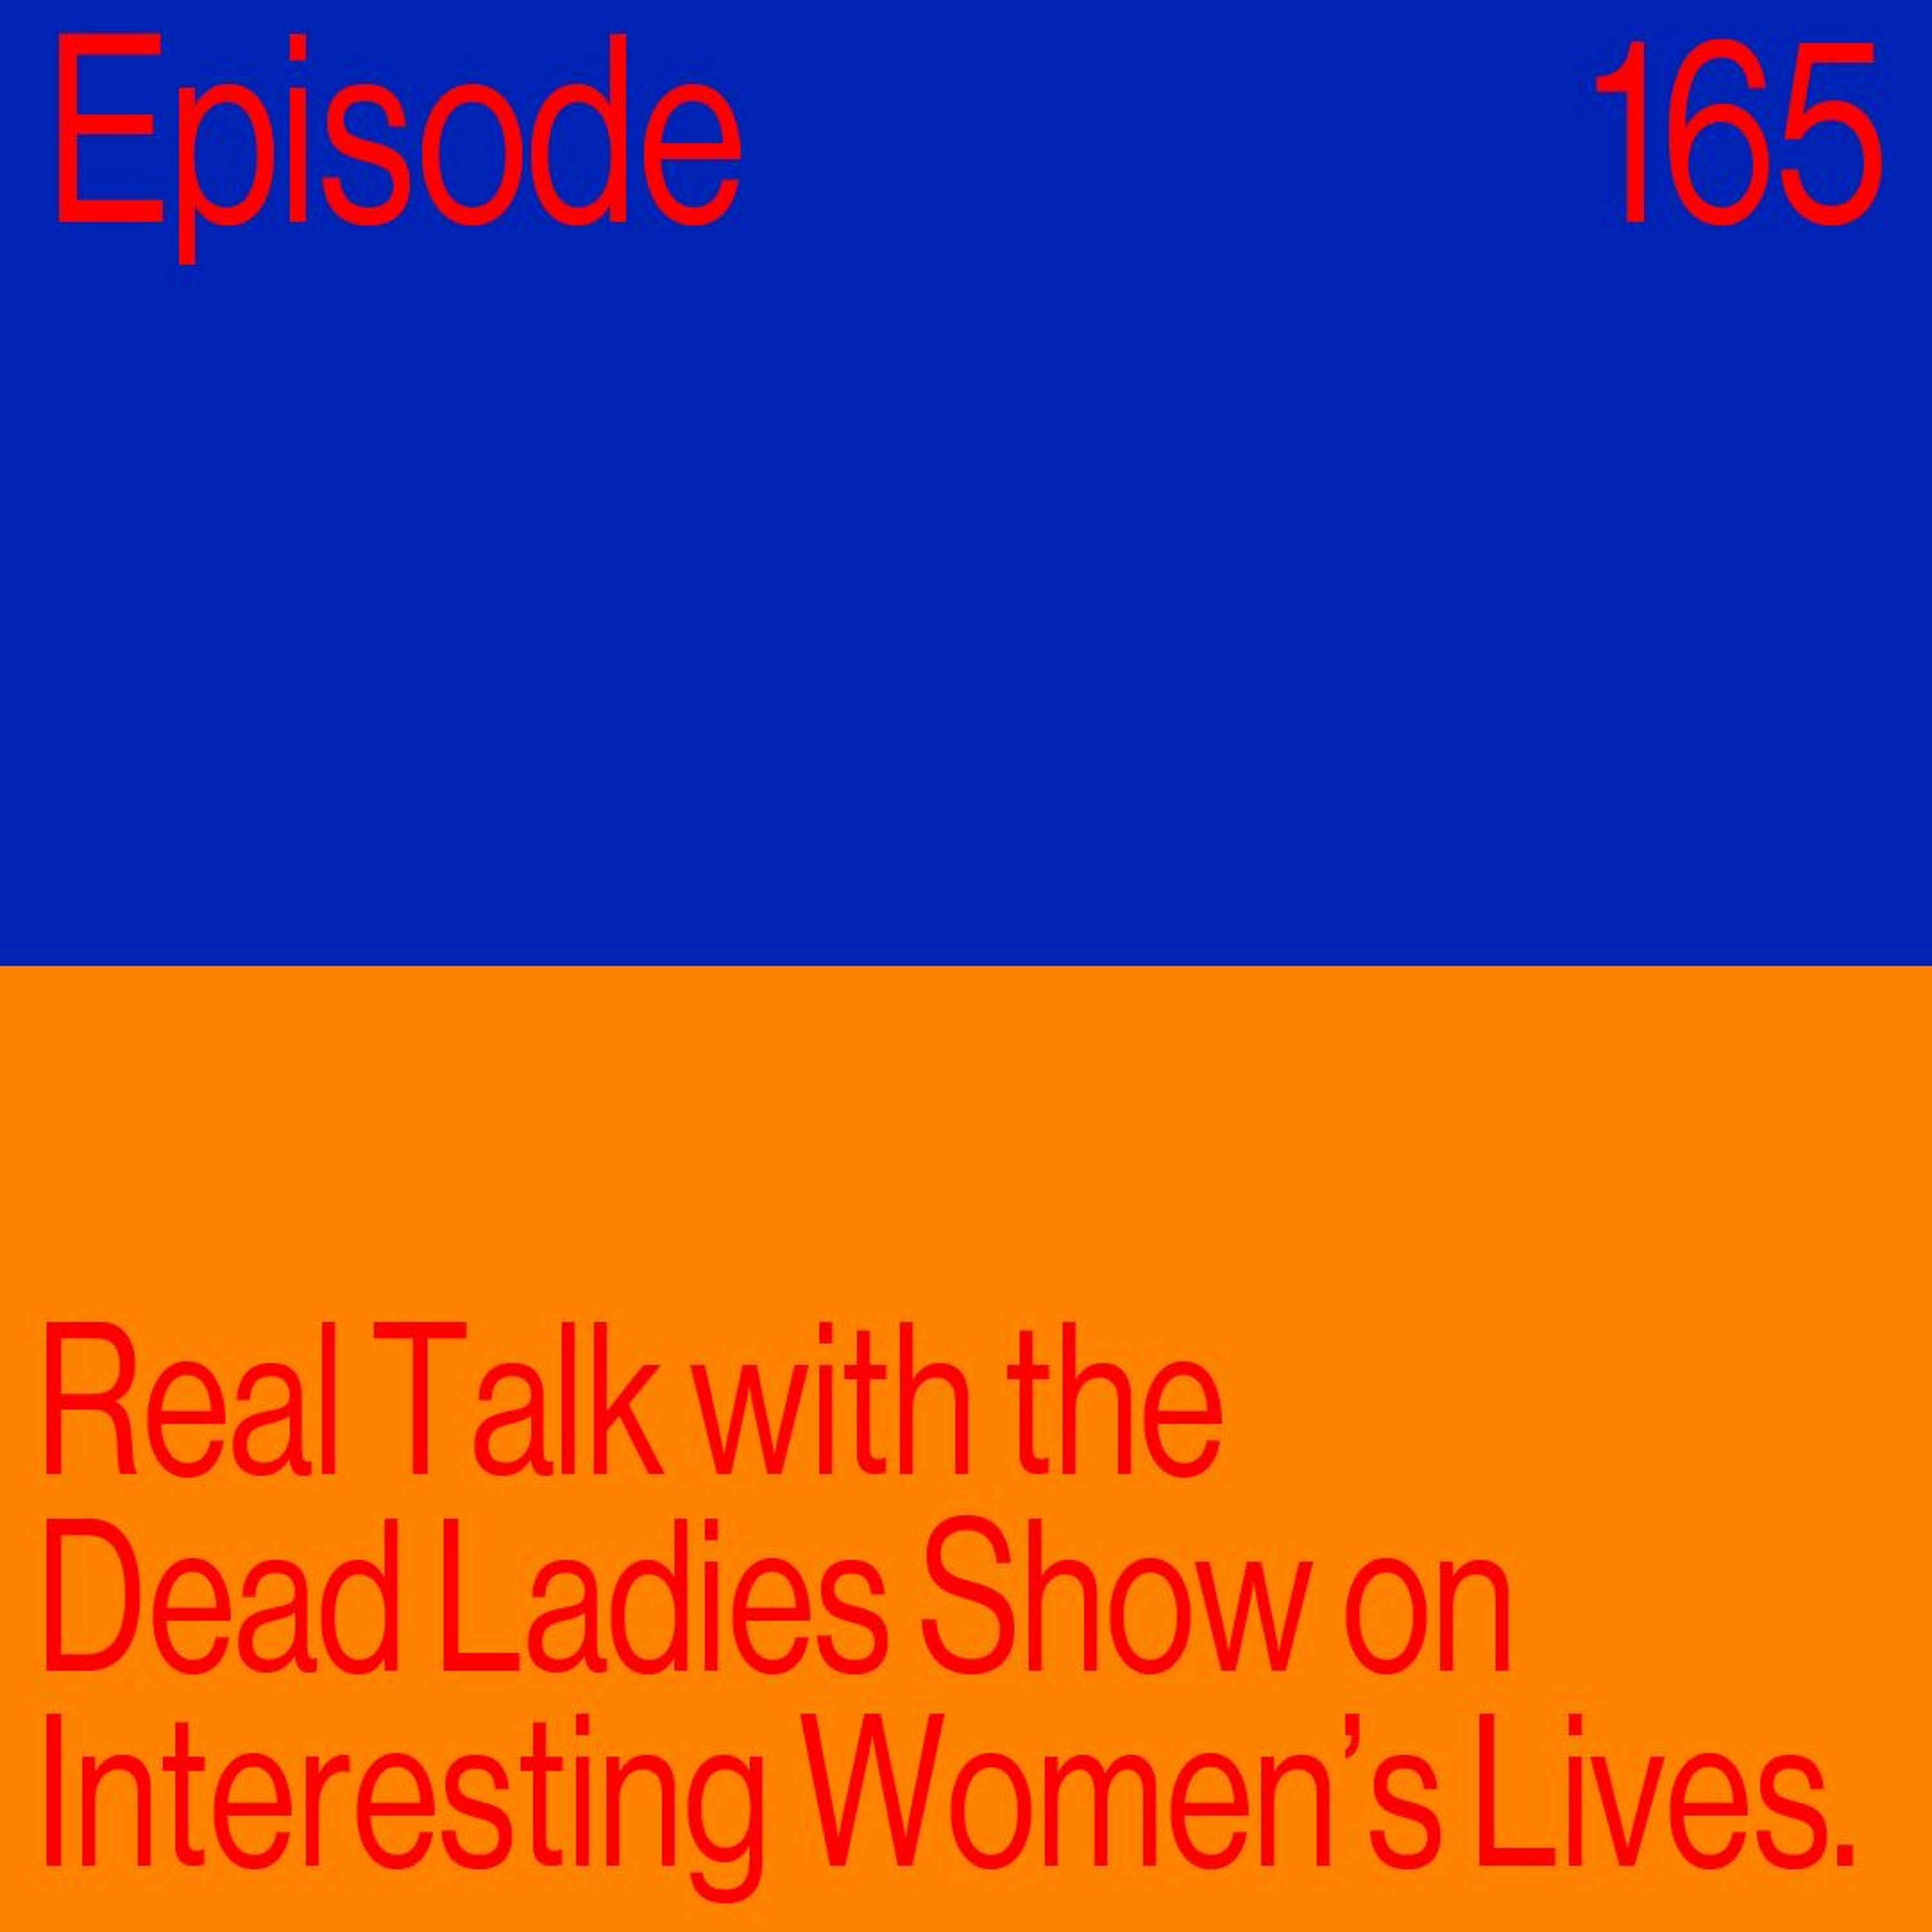 Episode 165: Real Talk with the Dead Ladies Show on Interesting Women’s Lives